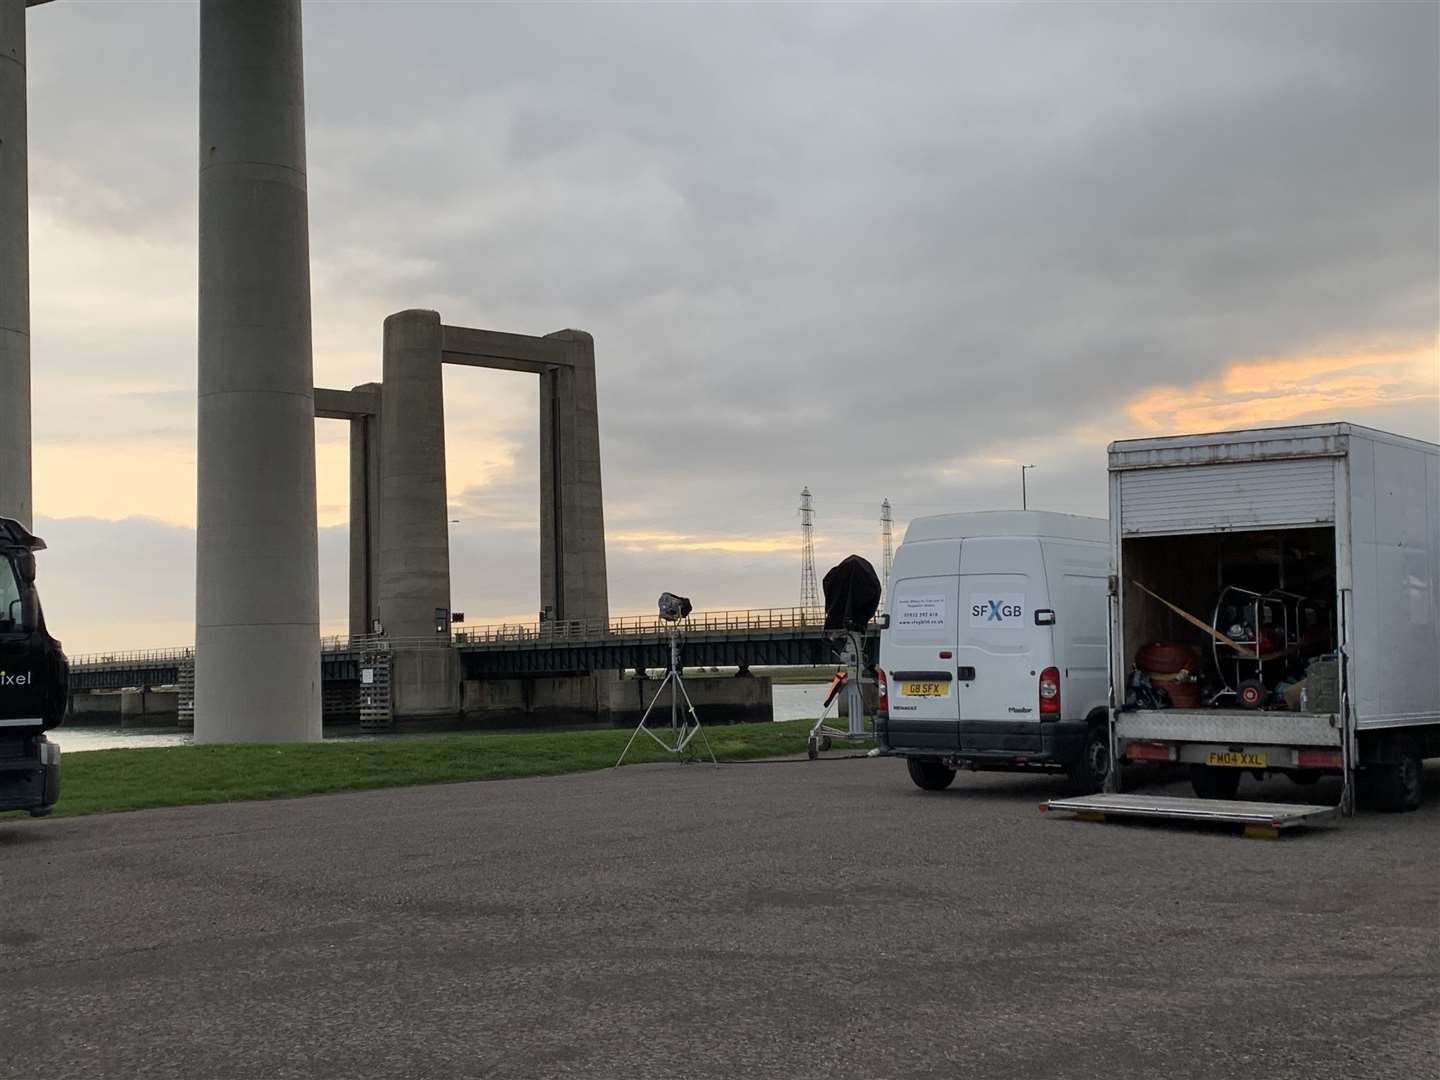 Filming of the ITV drama Too Close on the Kingsferry Bridge, Sheppey. Photo: Phil Drew